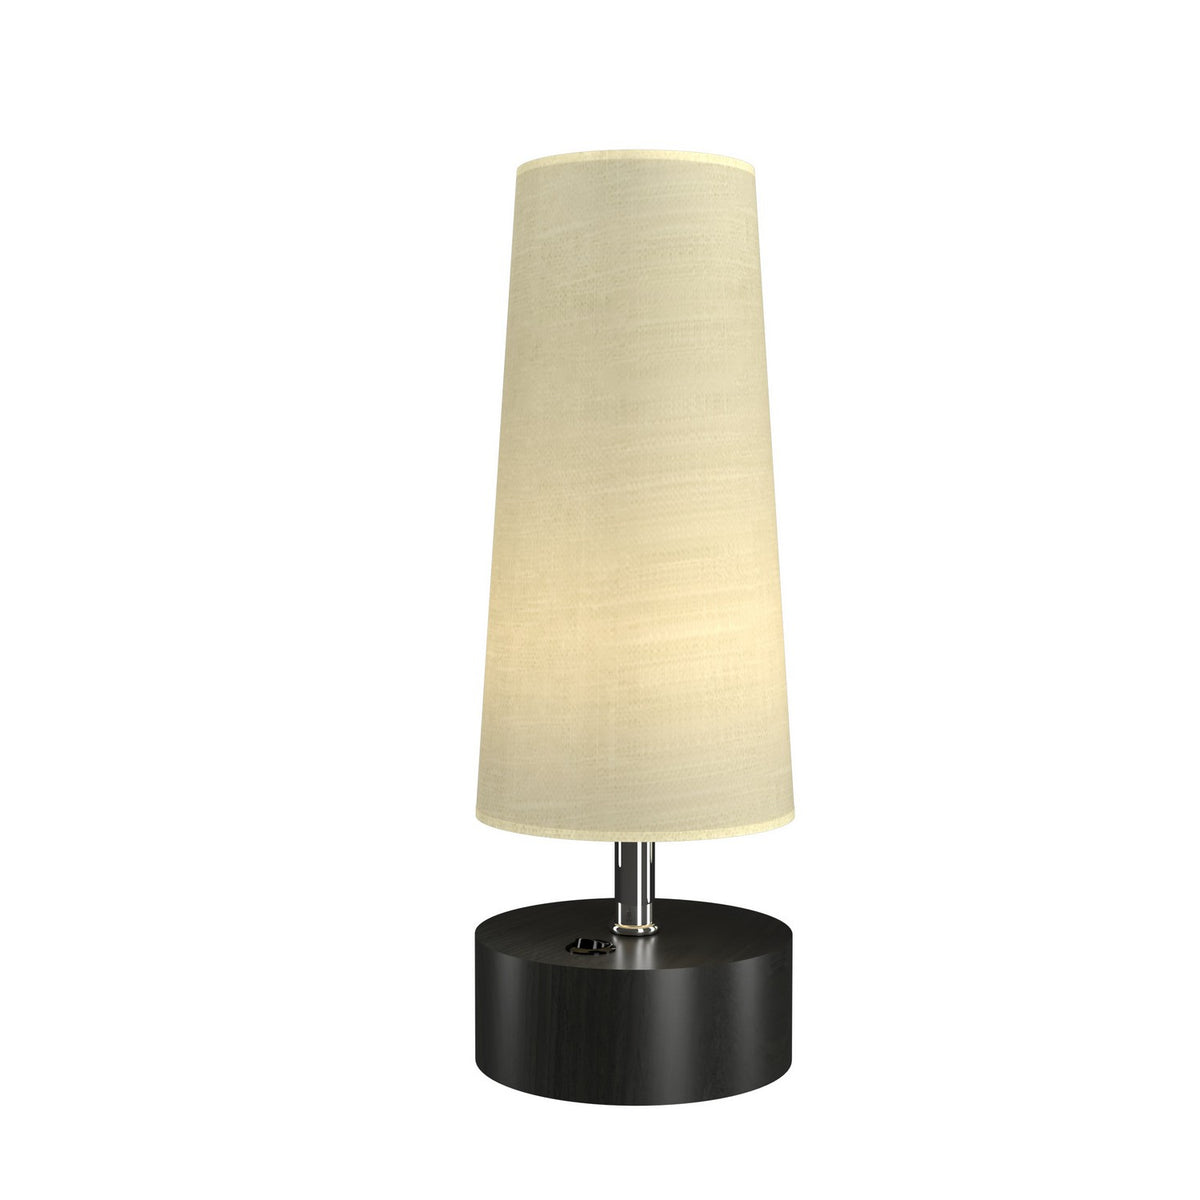 Accord Lighting - 7101.44 - LED Table Lamp - Clean - Charcoal